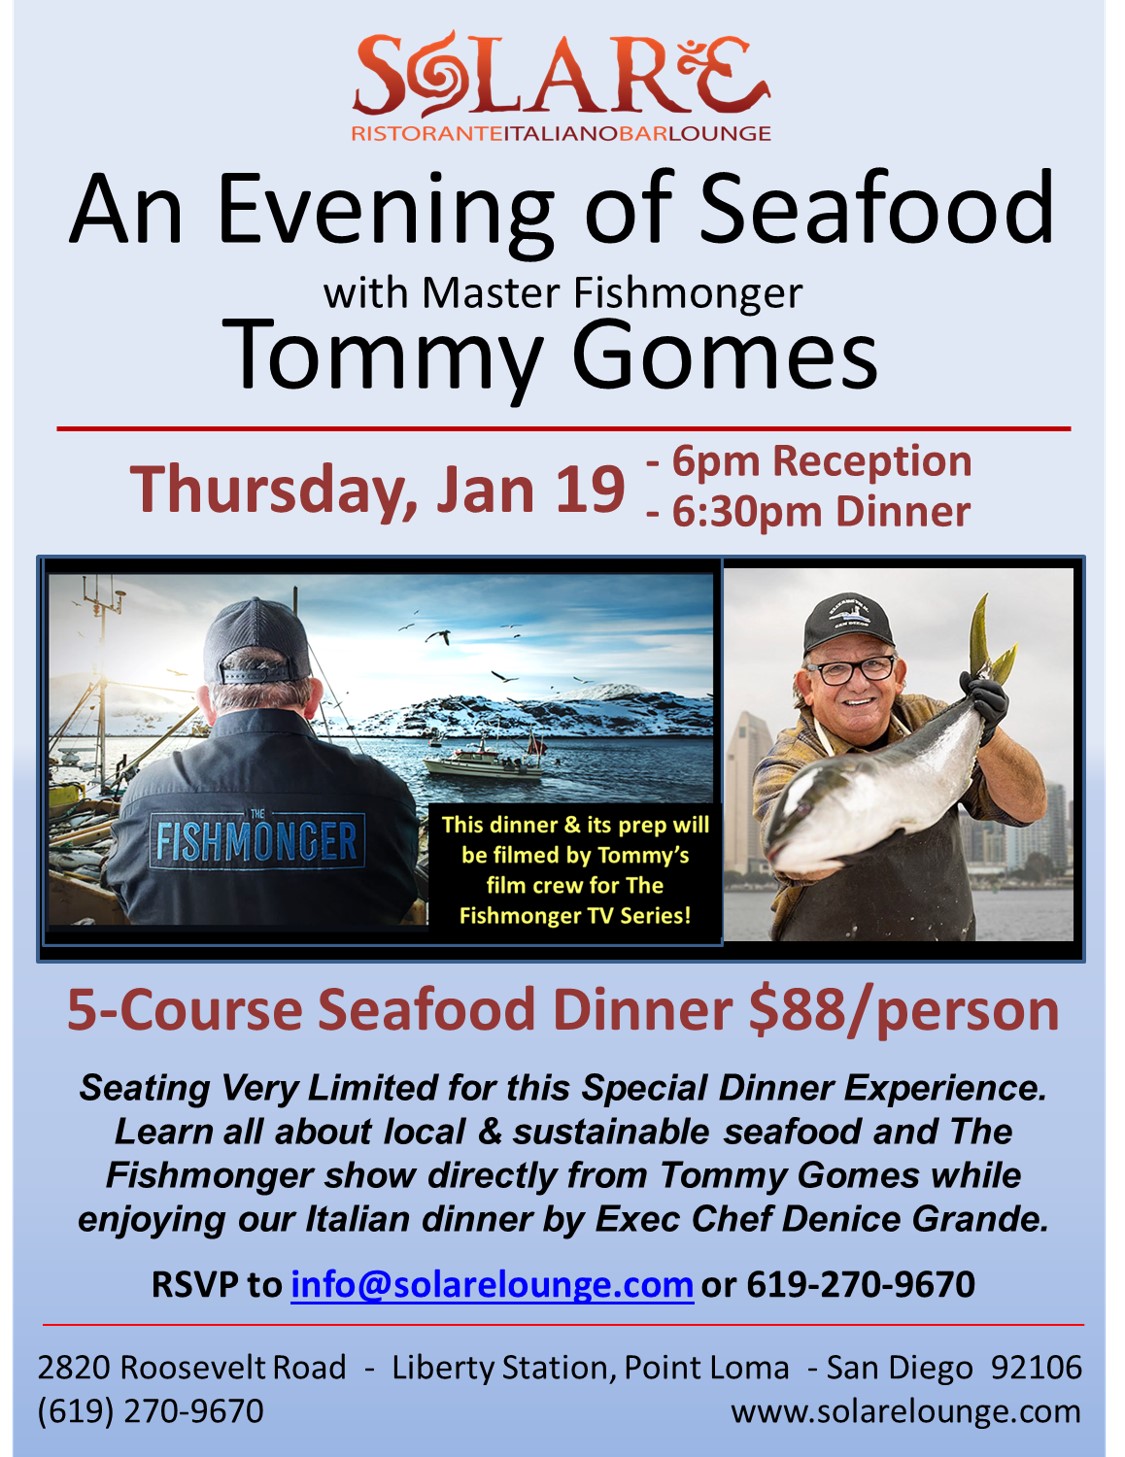 <a id="Solare-Tommy-Gomes-2023-Dinner"></a>Tommy Gomes extra special Evening of Seafood Dinner! <span style="color: red;">- Sold Out</span>